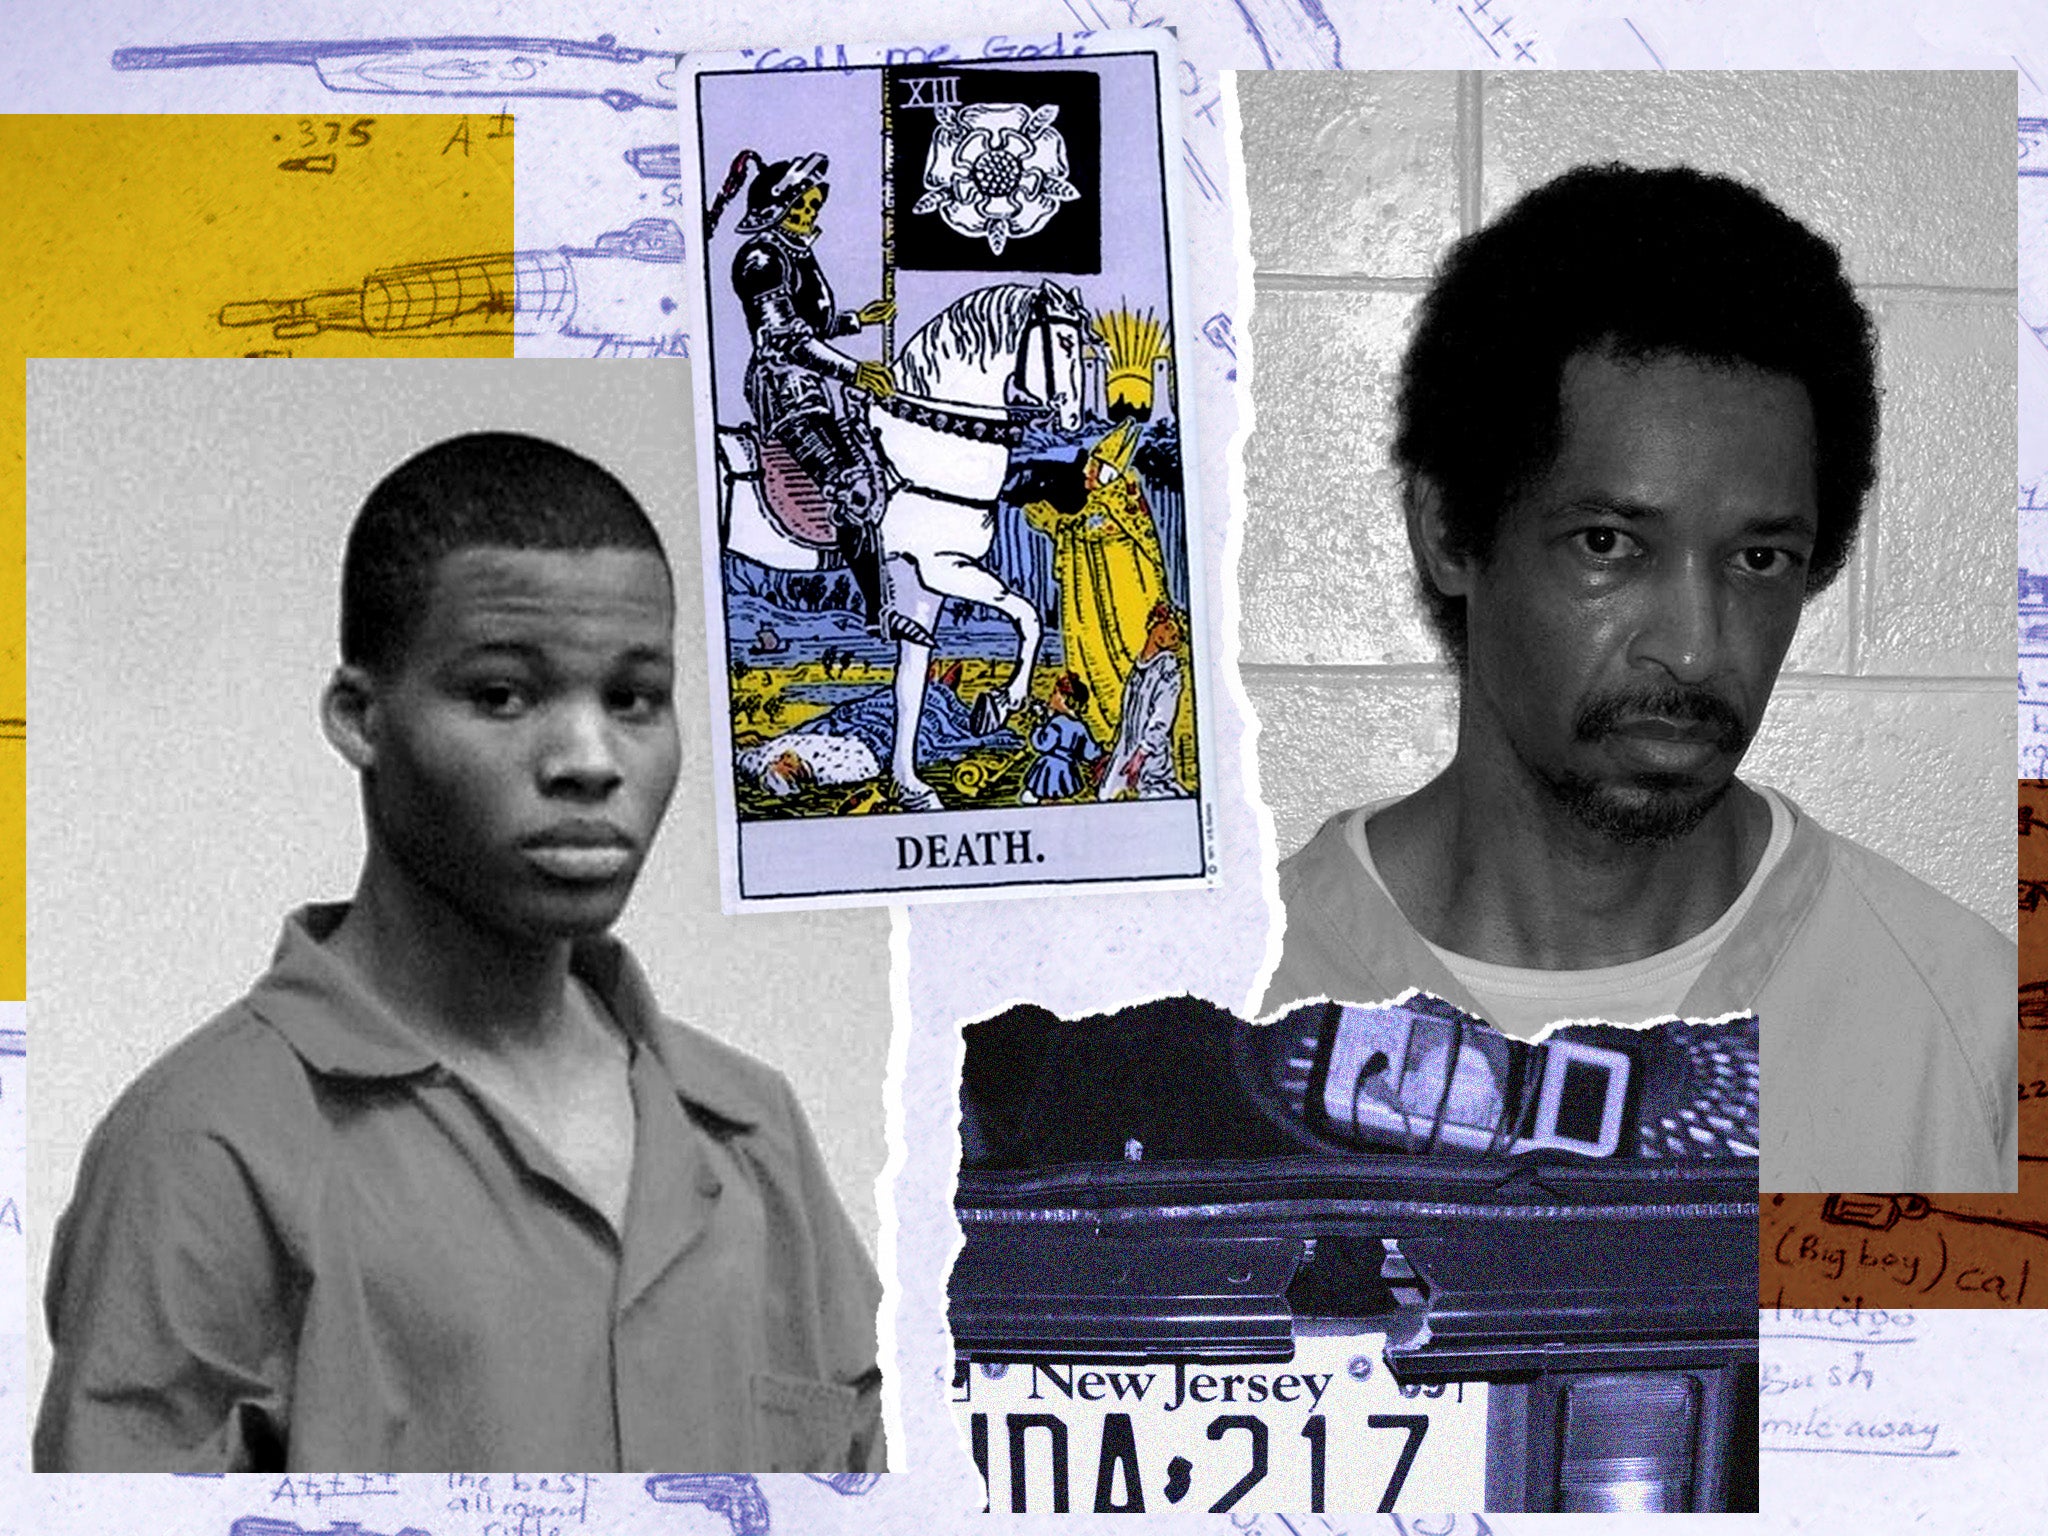 John Allen Muhammad and his teenage accomplice Lee Boyd Malvo killed 10 in a 23-day reign of terror